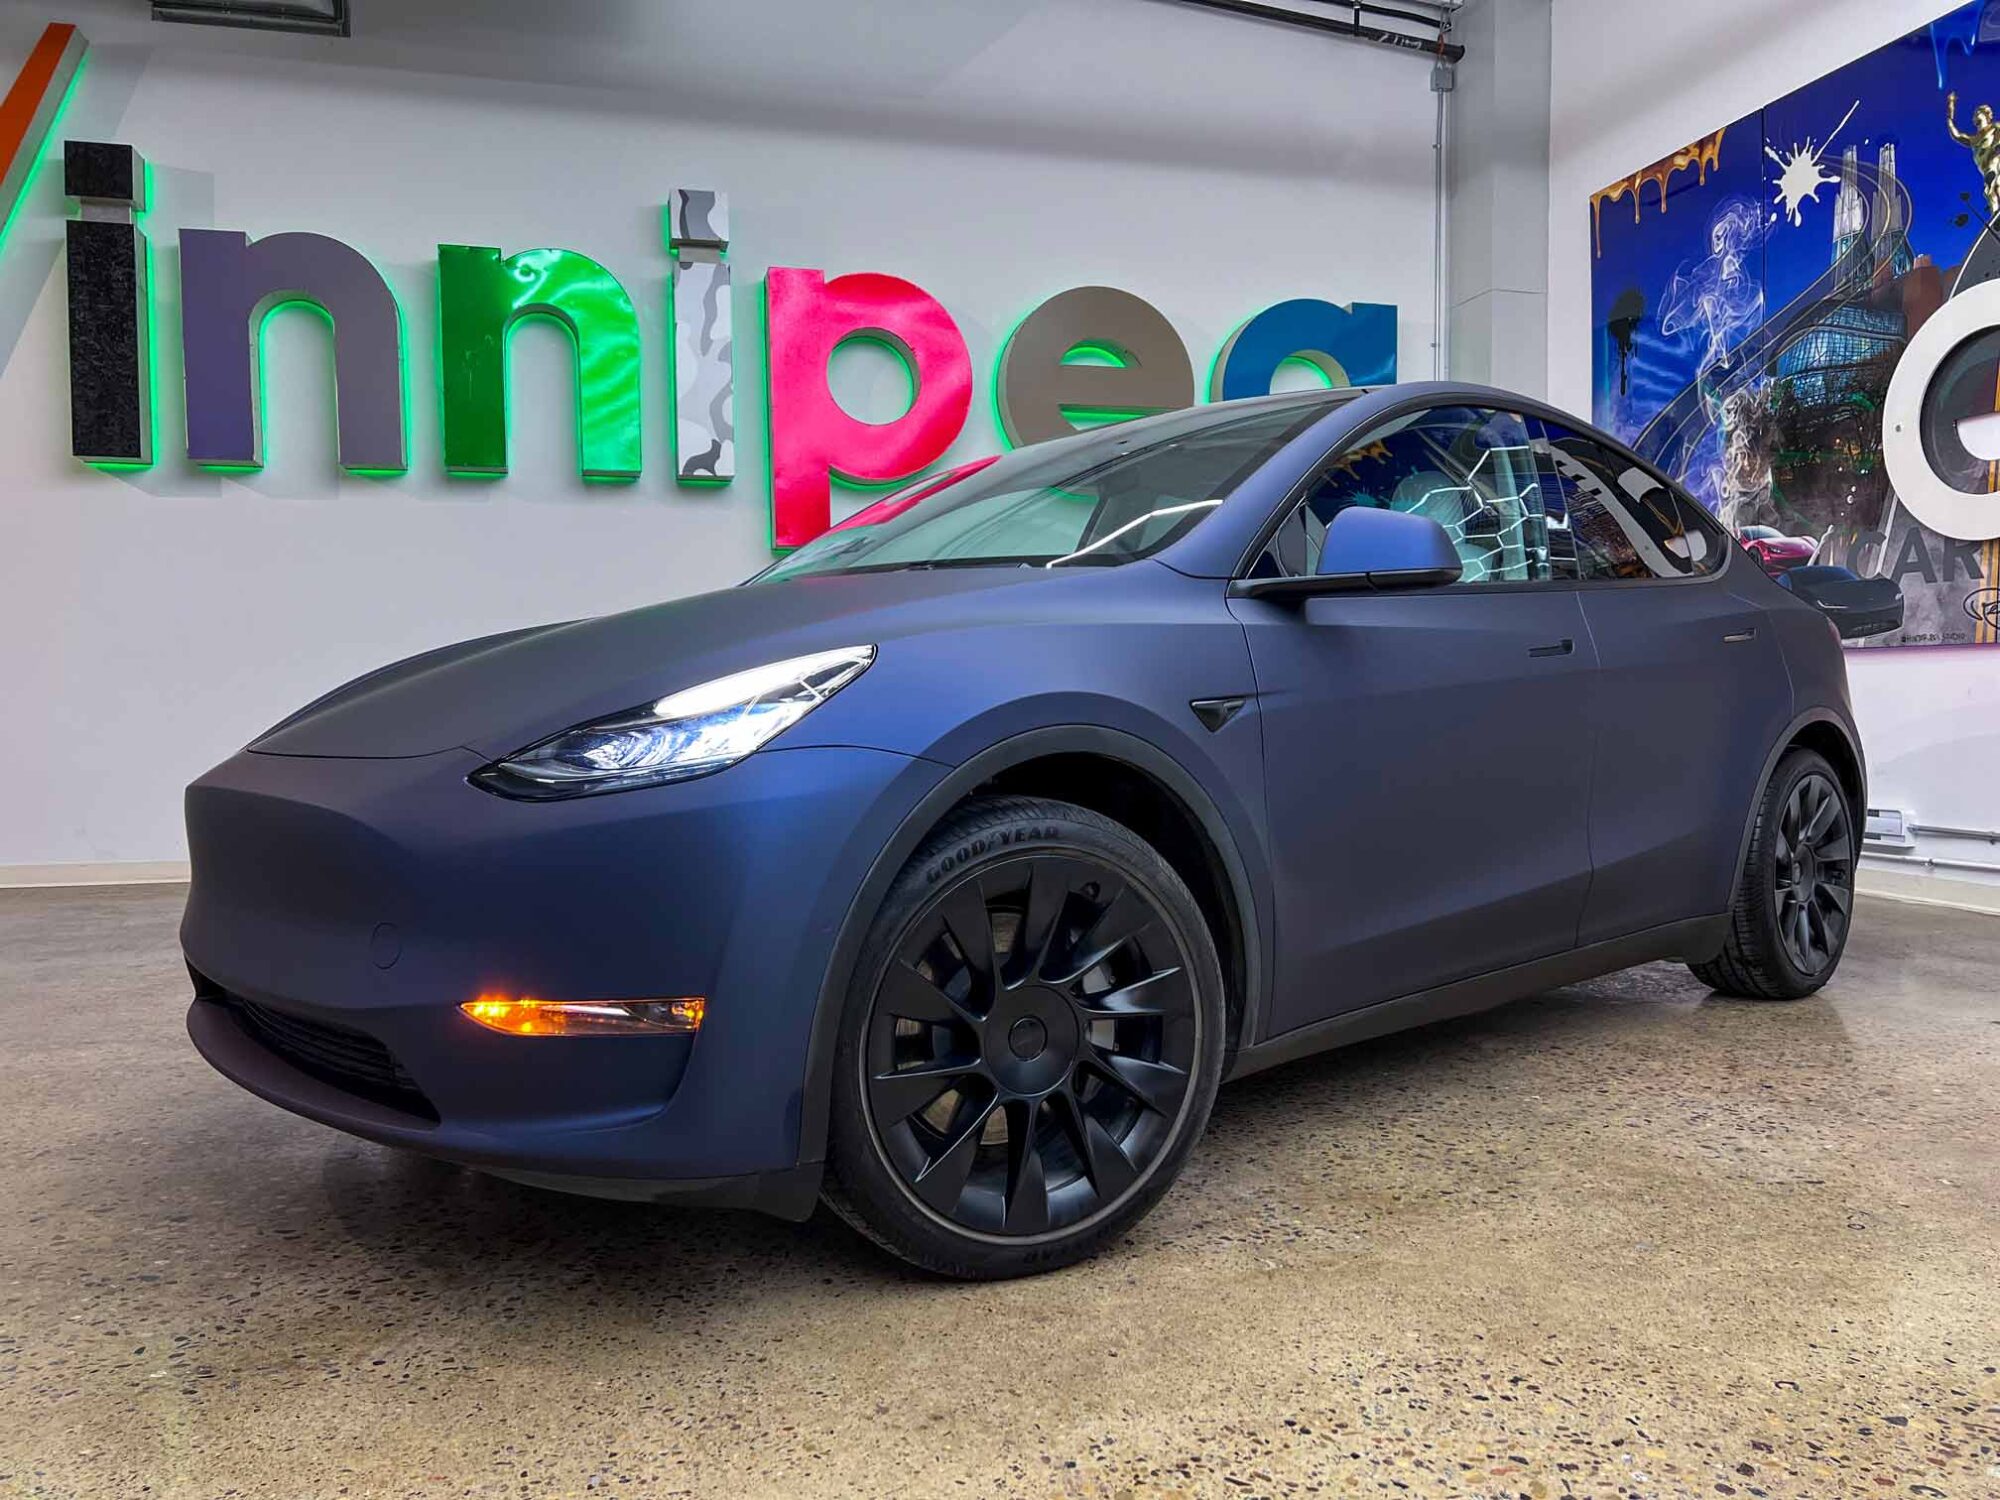 Tesla, Wrap, Tesla Wraps, Tesla Wrap Winnipeg, Winnipeg Tesla Wraps, Tesla Wraps Winnipeg, Vinyl Graphics Tesla, Business Graphics, Wrap Price, Winnipeg Wrap Price, Wrap Prices Winnipeg, Best Vinyl Wraps Winnipeg, Winnipegs Best Wraps, Wrap, Wrapped, Wrapping, Wrappers